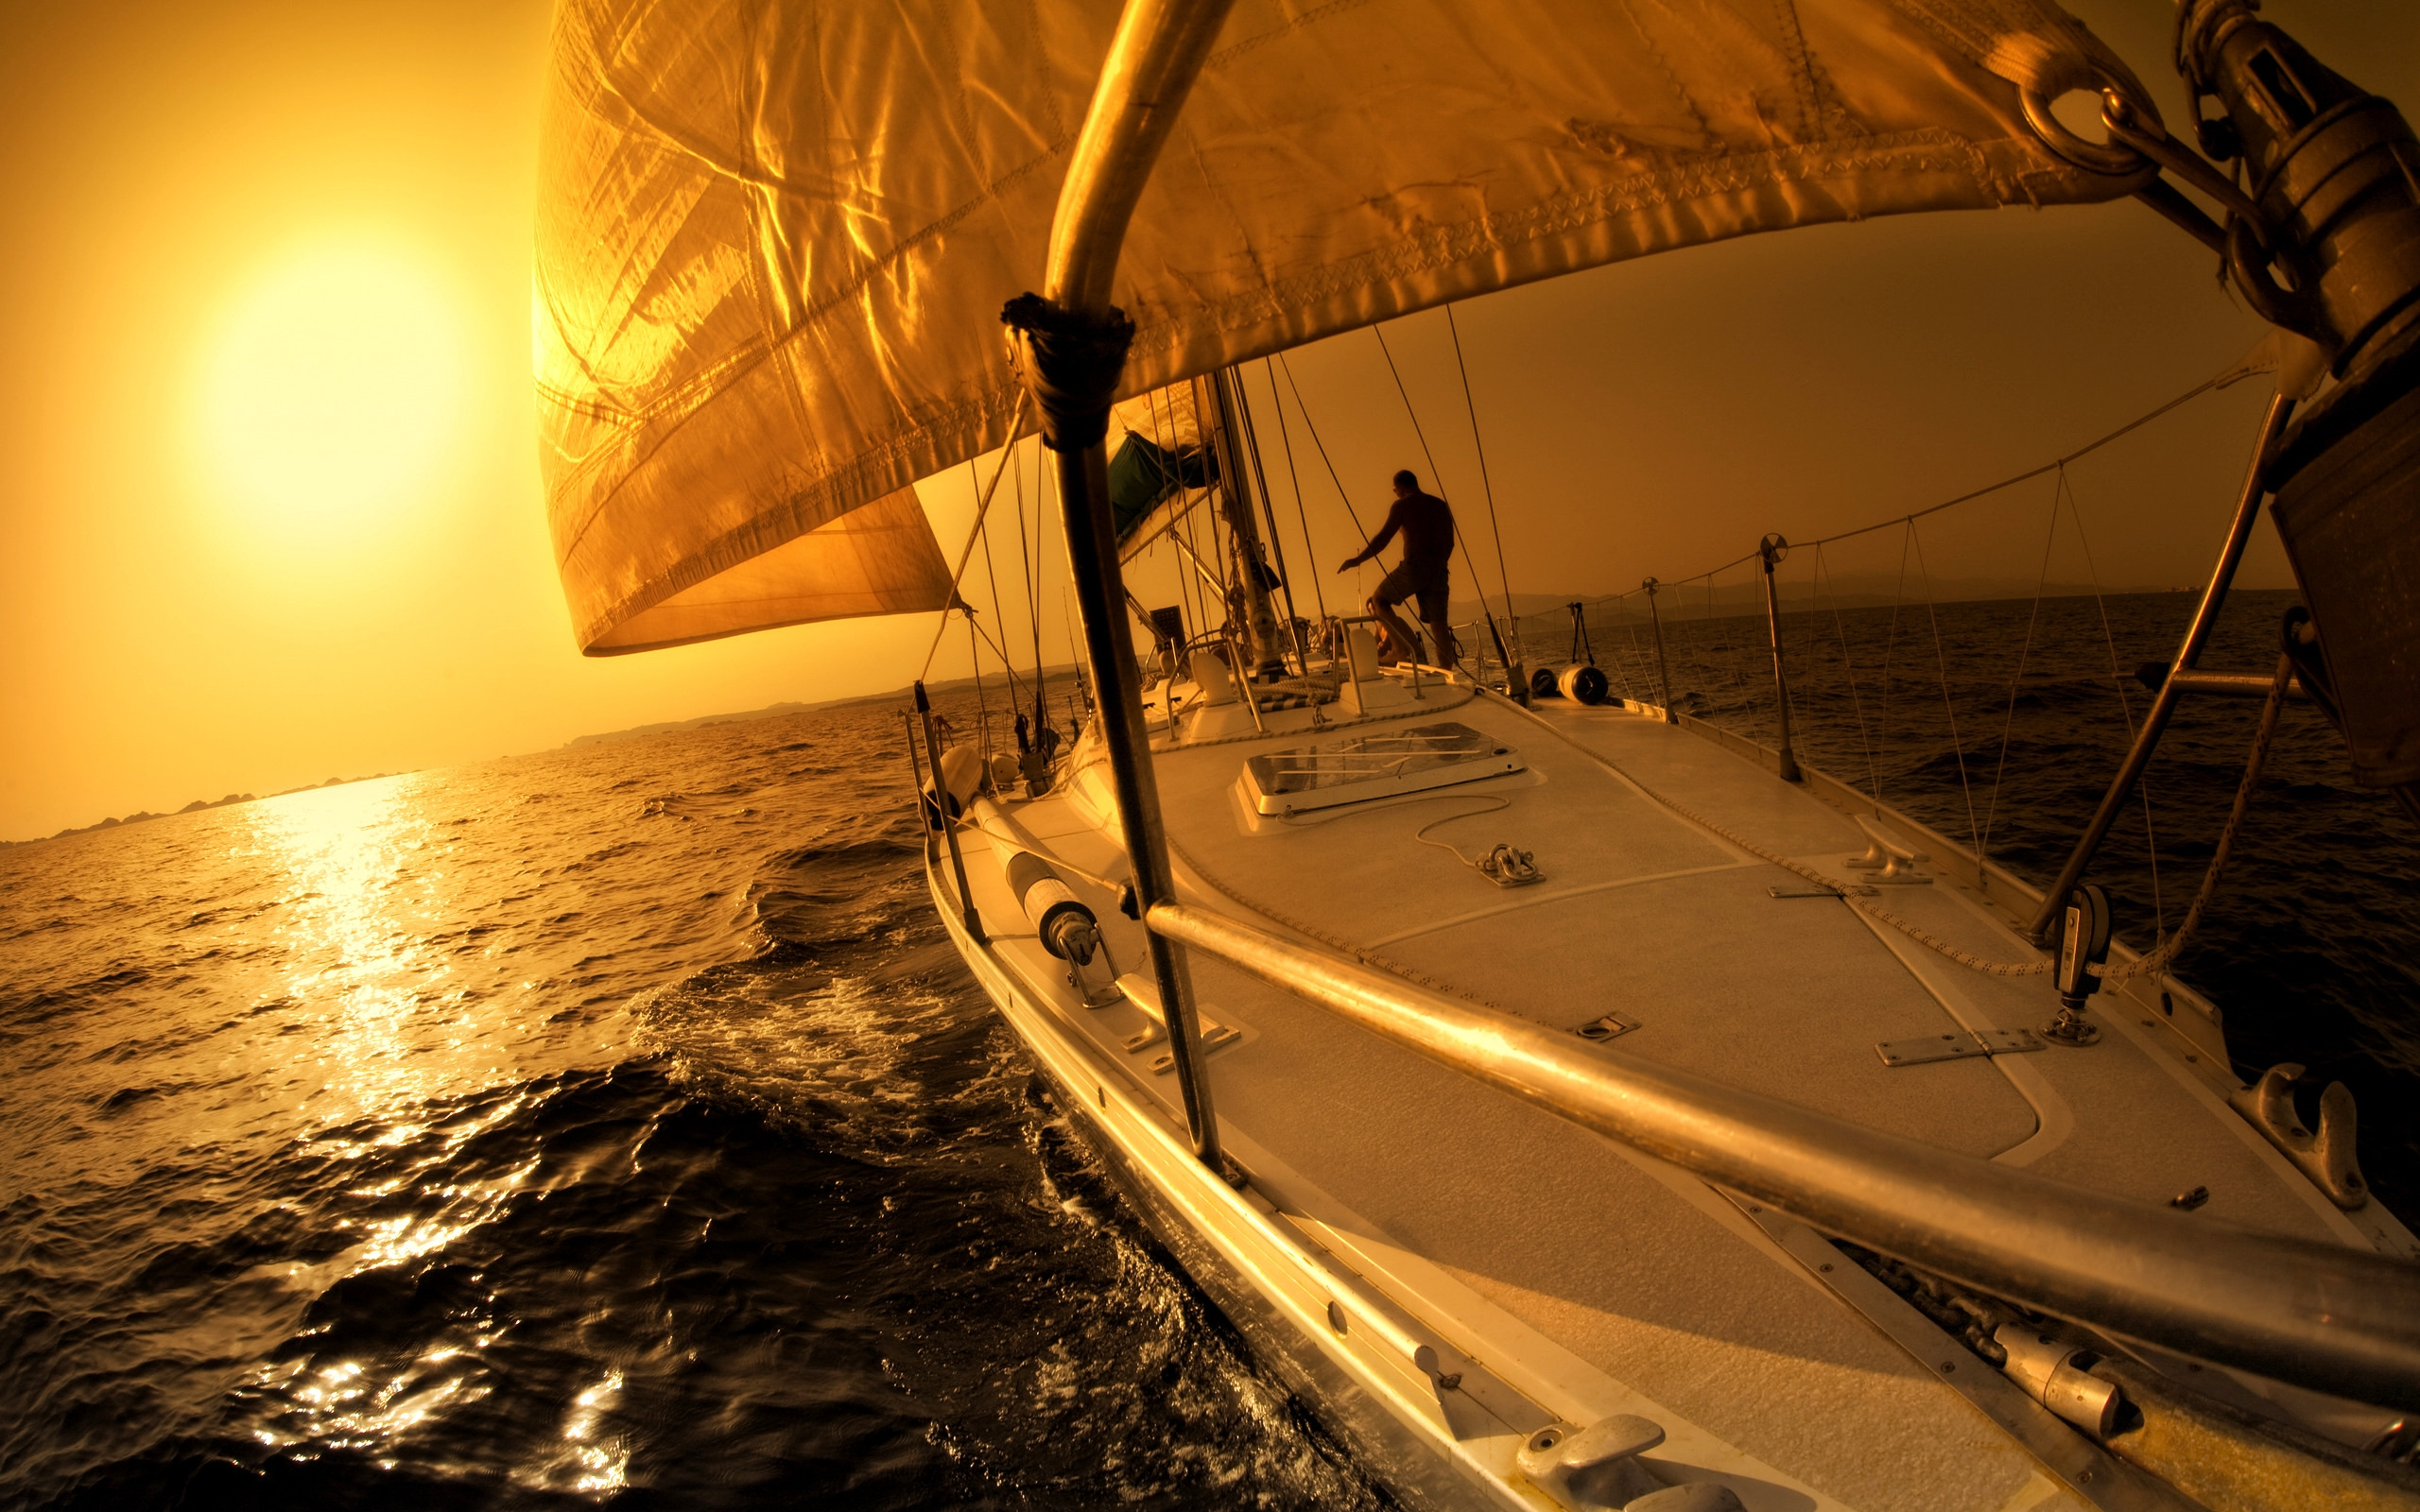 sunset and yacht with , photo desktop wallpapers, handsomely, sun